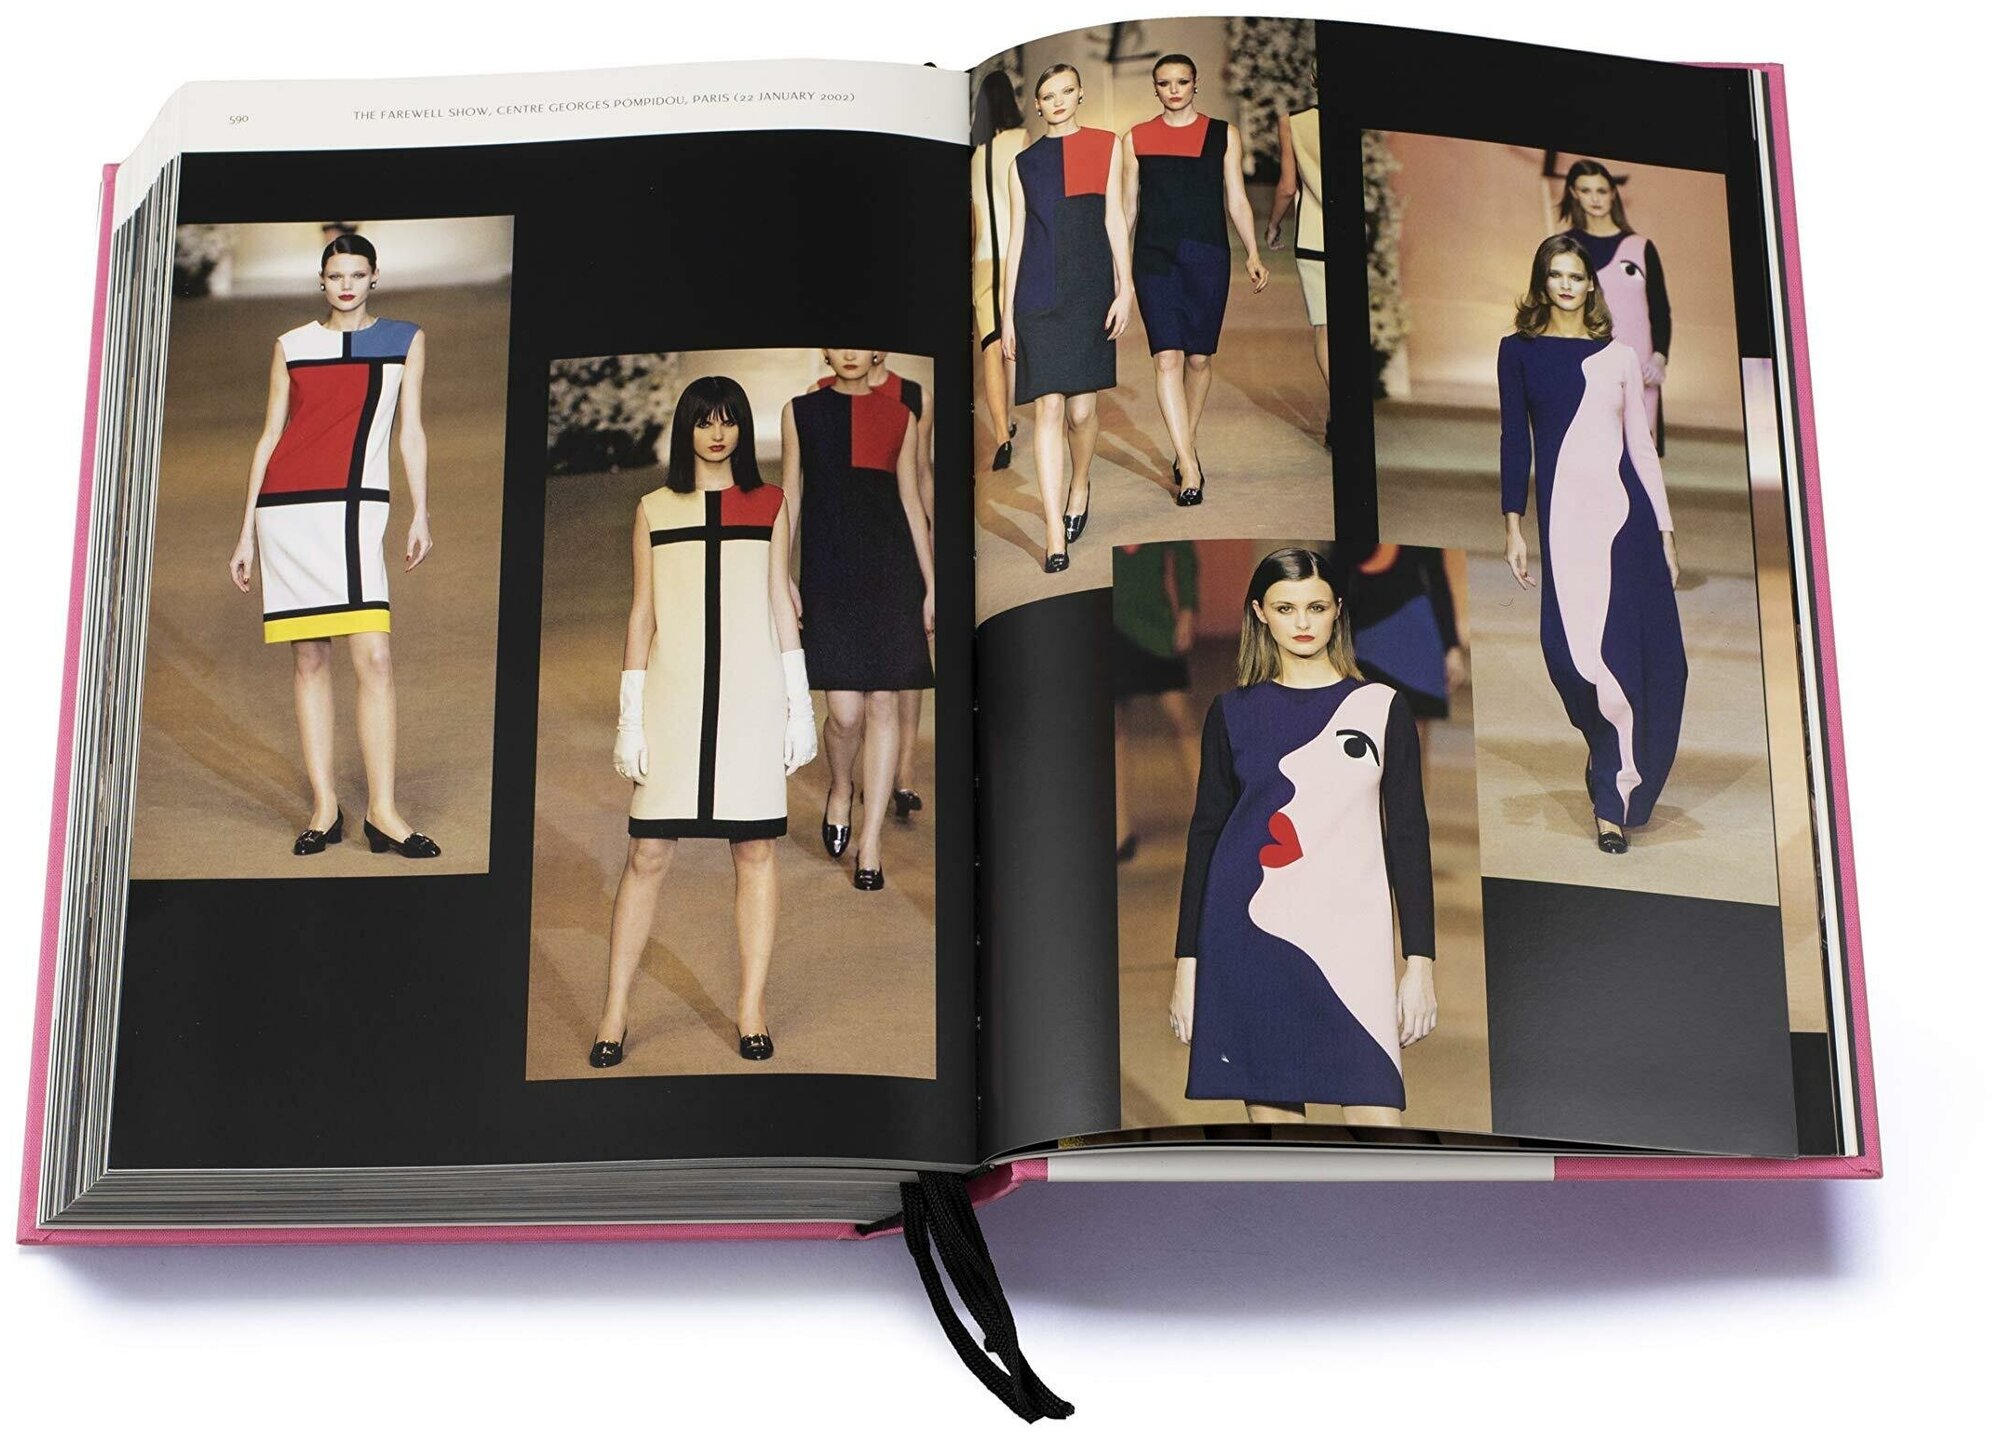 Olivier Flaviano "Yves Saint Laurent Catwalk : The Complete Haute Couture Collections 1962-2002"